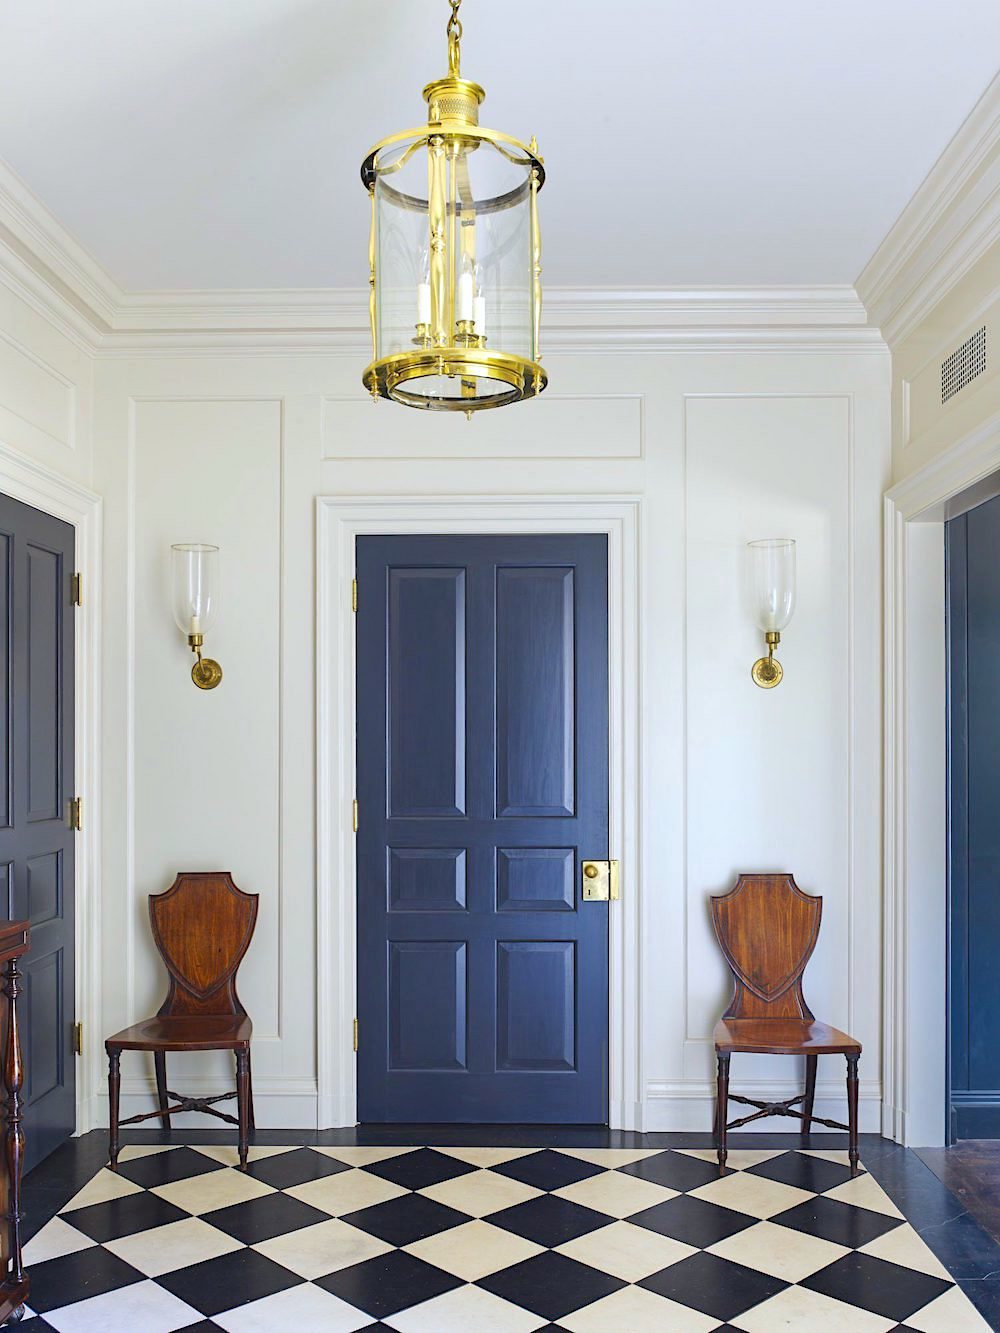 James Carter_classical architects - classical entry - black and white floor